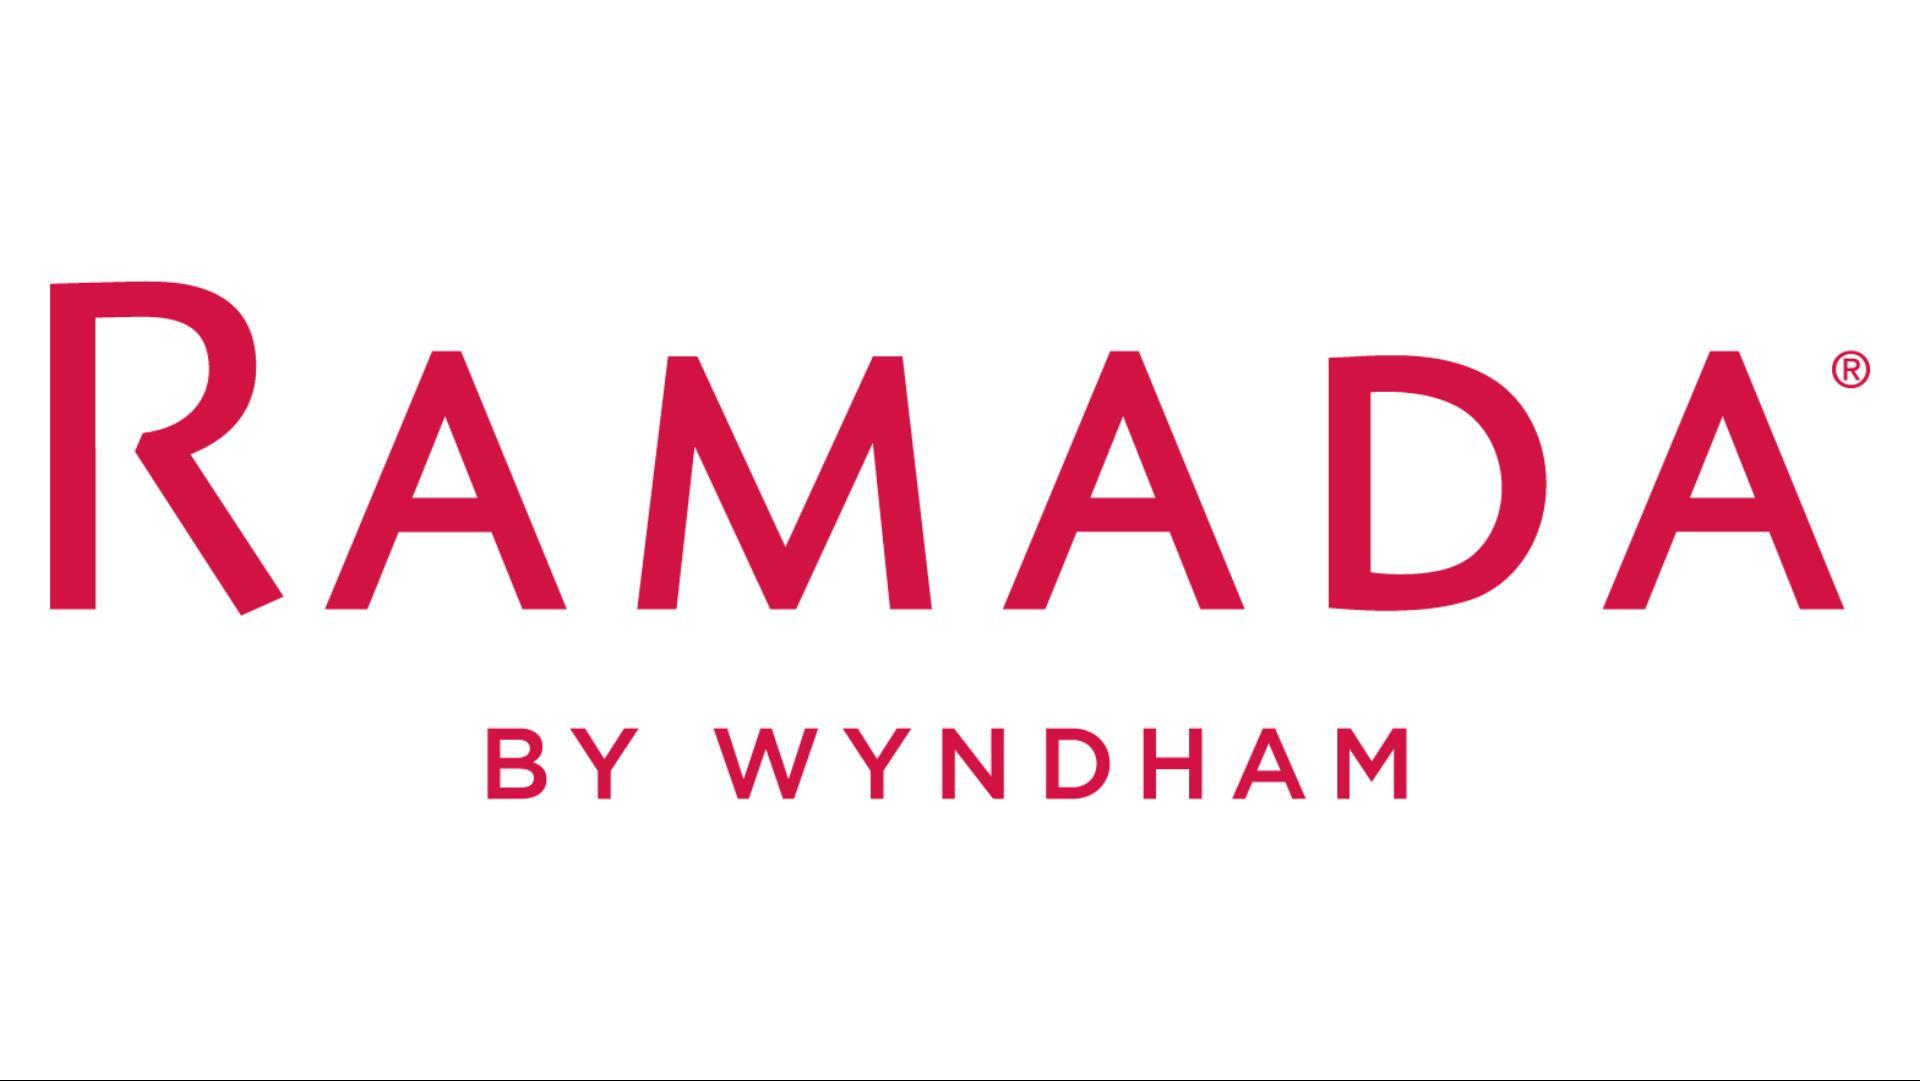 Ramada by Wyndham Northern Grand Hotel & Conference Centre in Fort St. John, BC